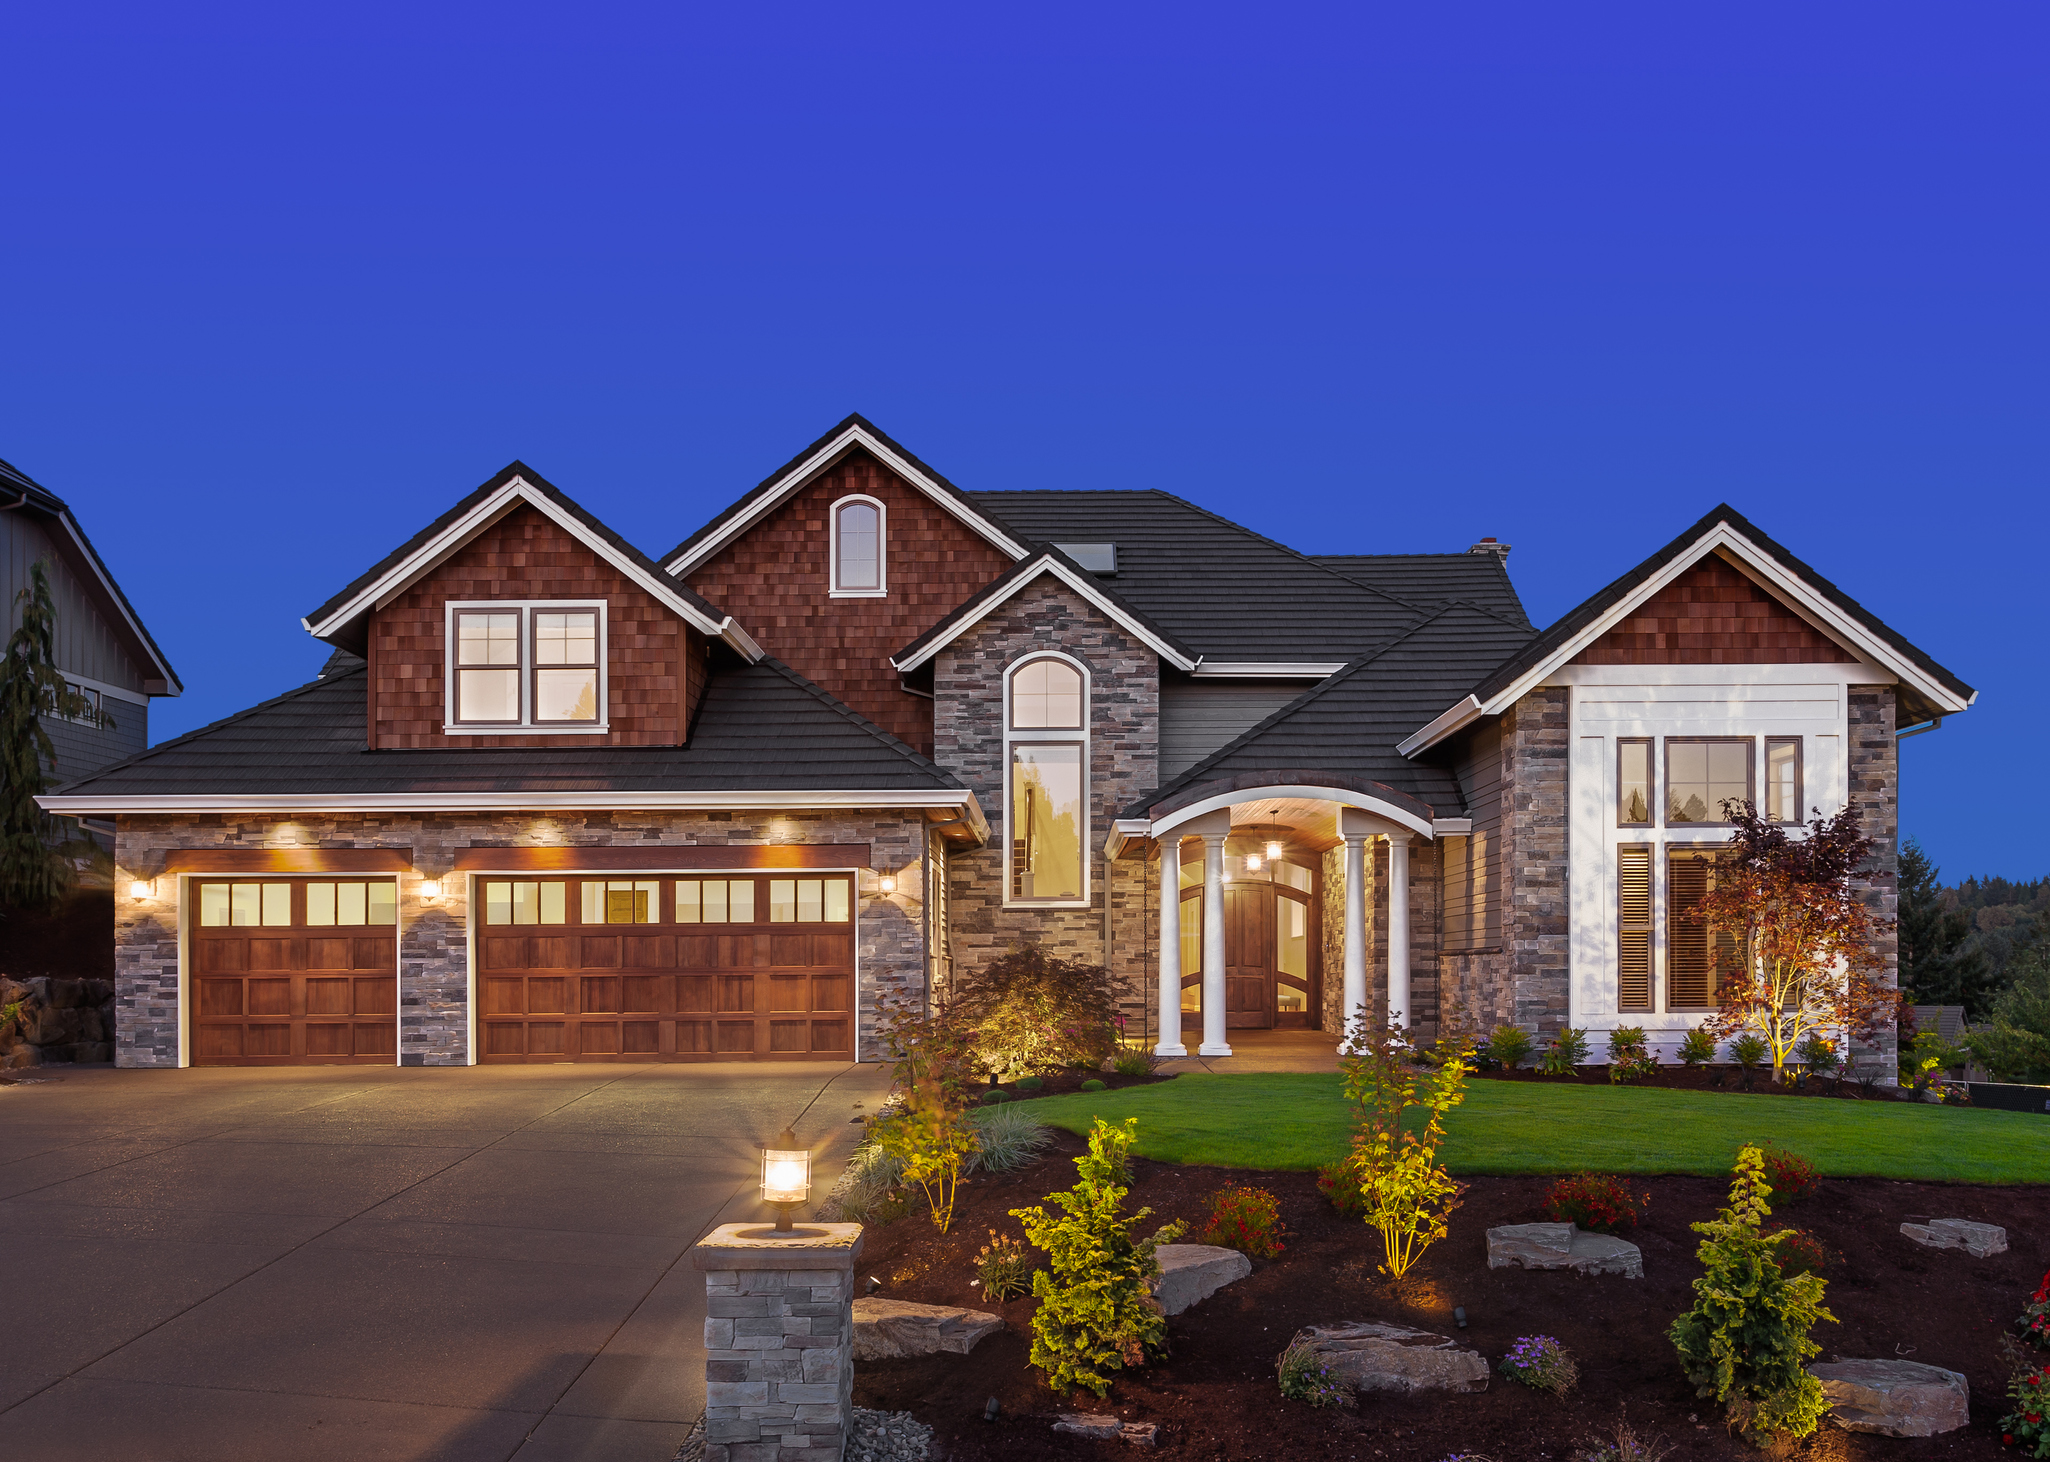 Front elevation of luxury home in evening